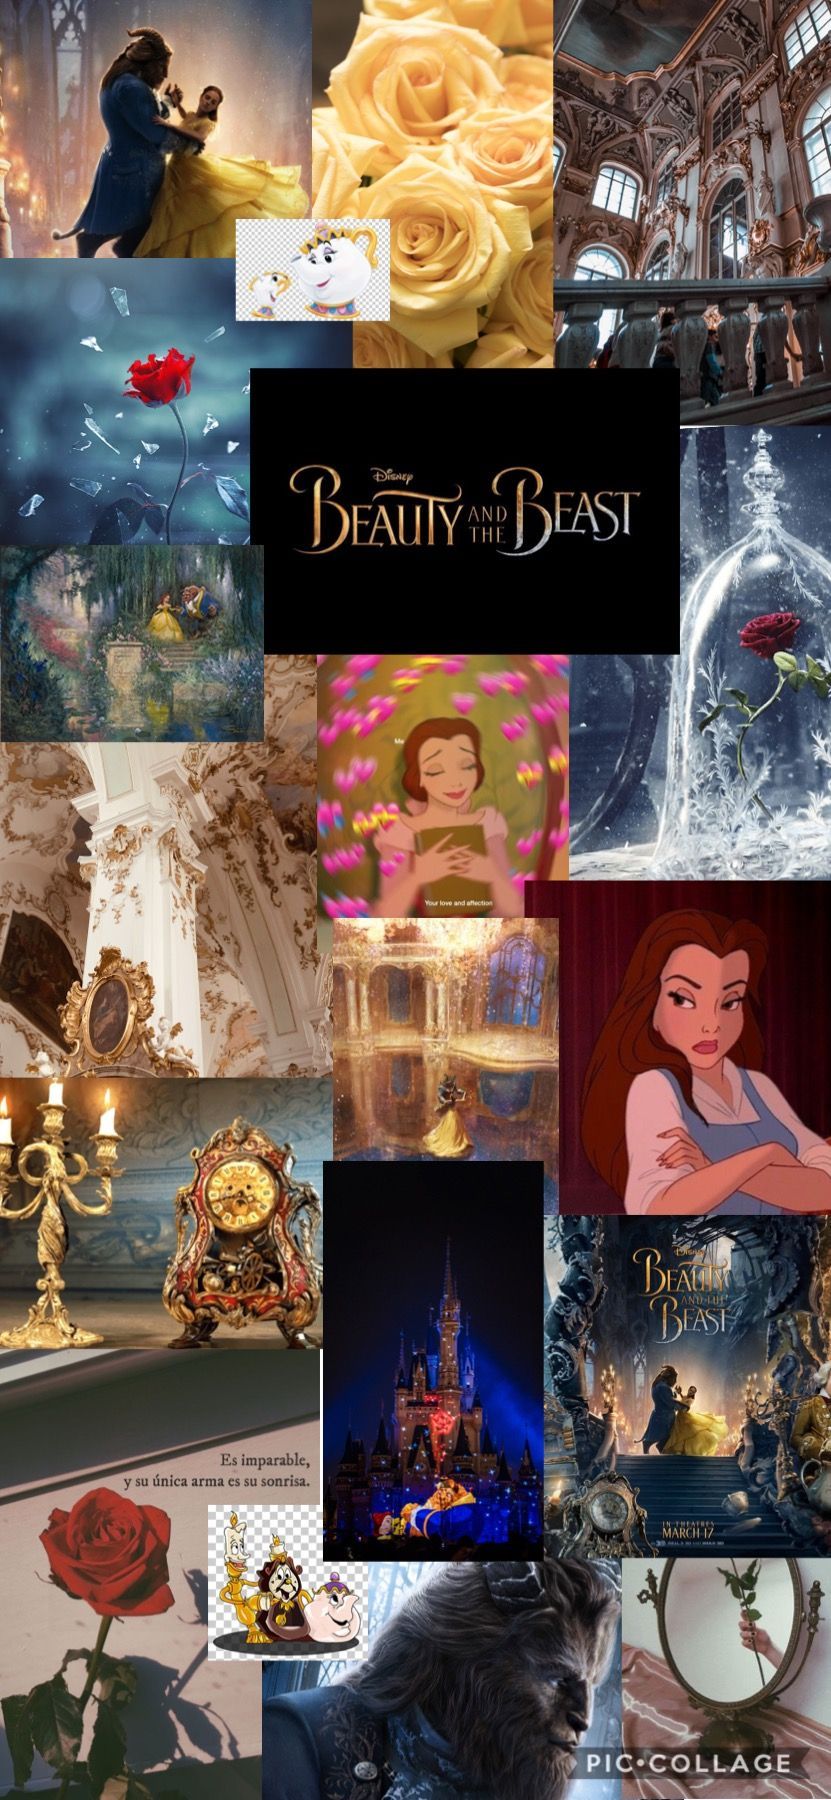 Beauty and the Beast iPhone wallpapers feel free